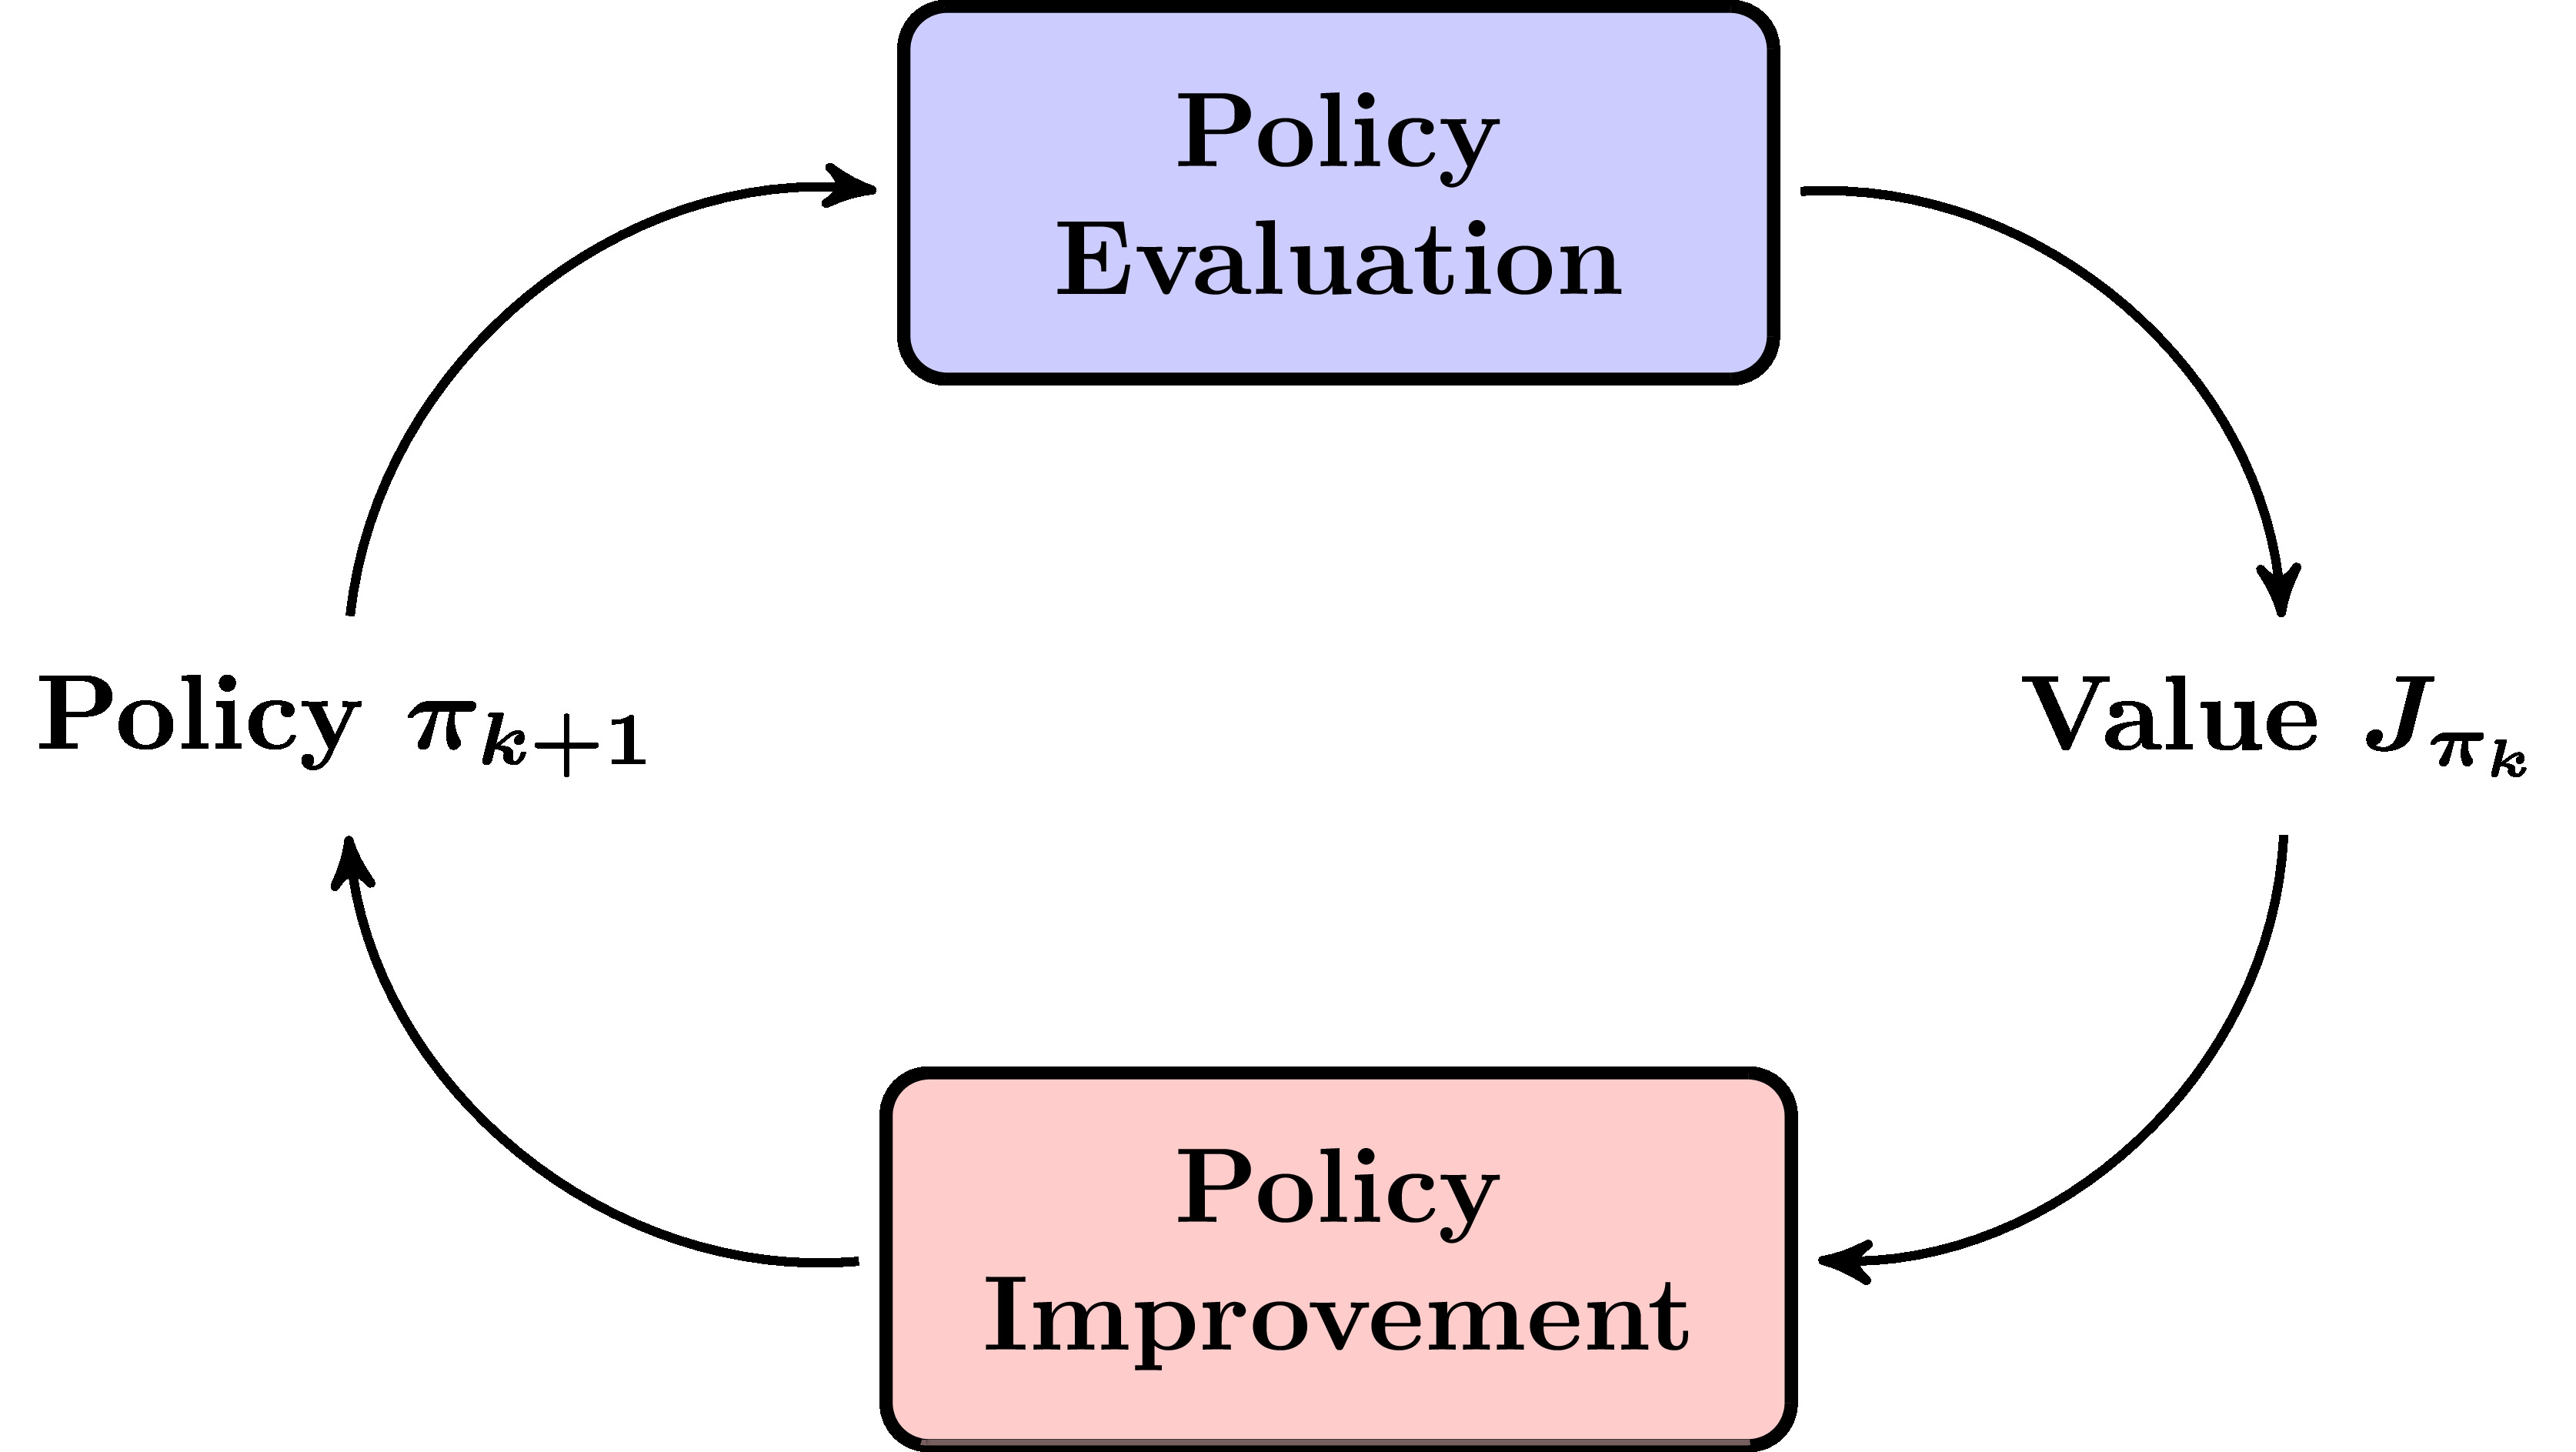 Policy iteration